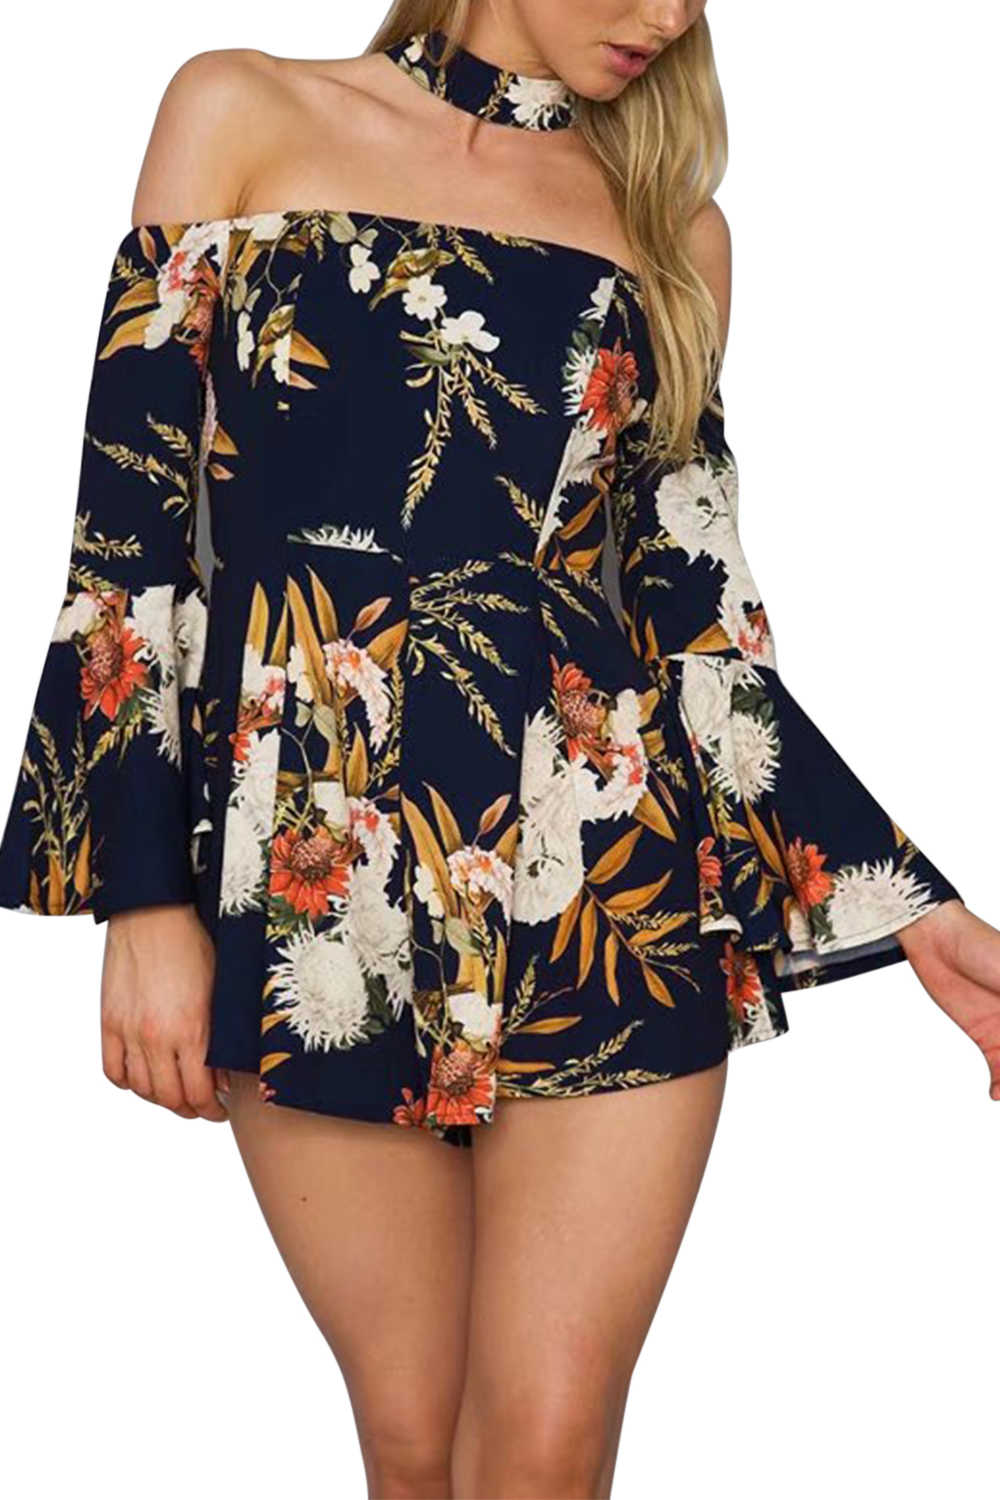 Iyasson Women Floral Print Off Shoulder Bell Sleeve Rompers